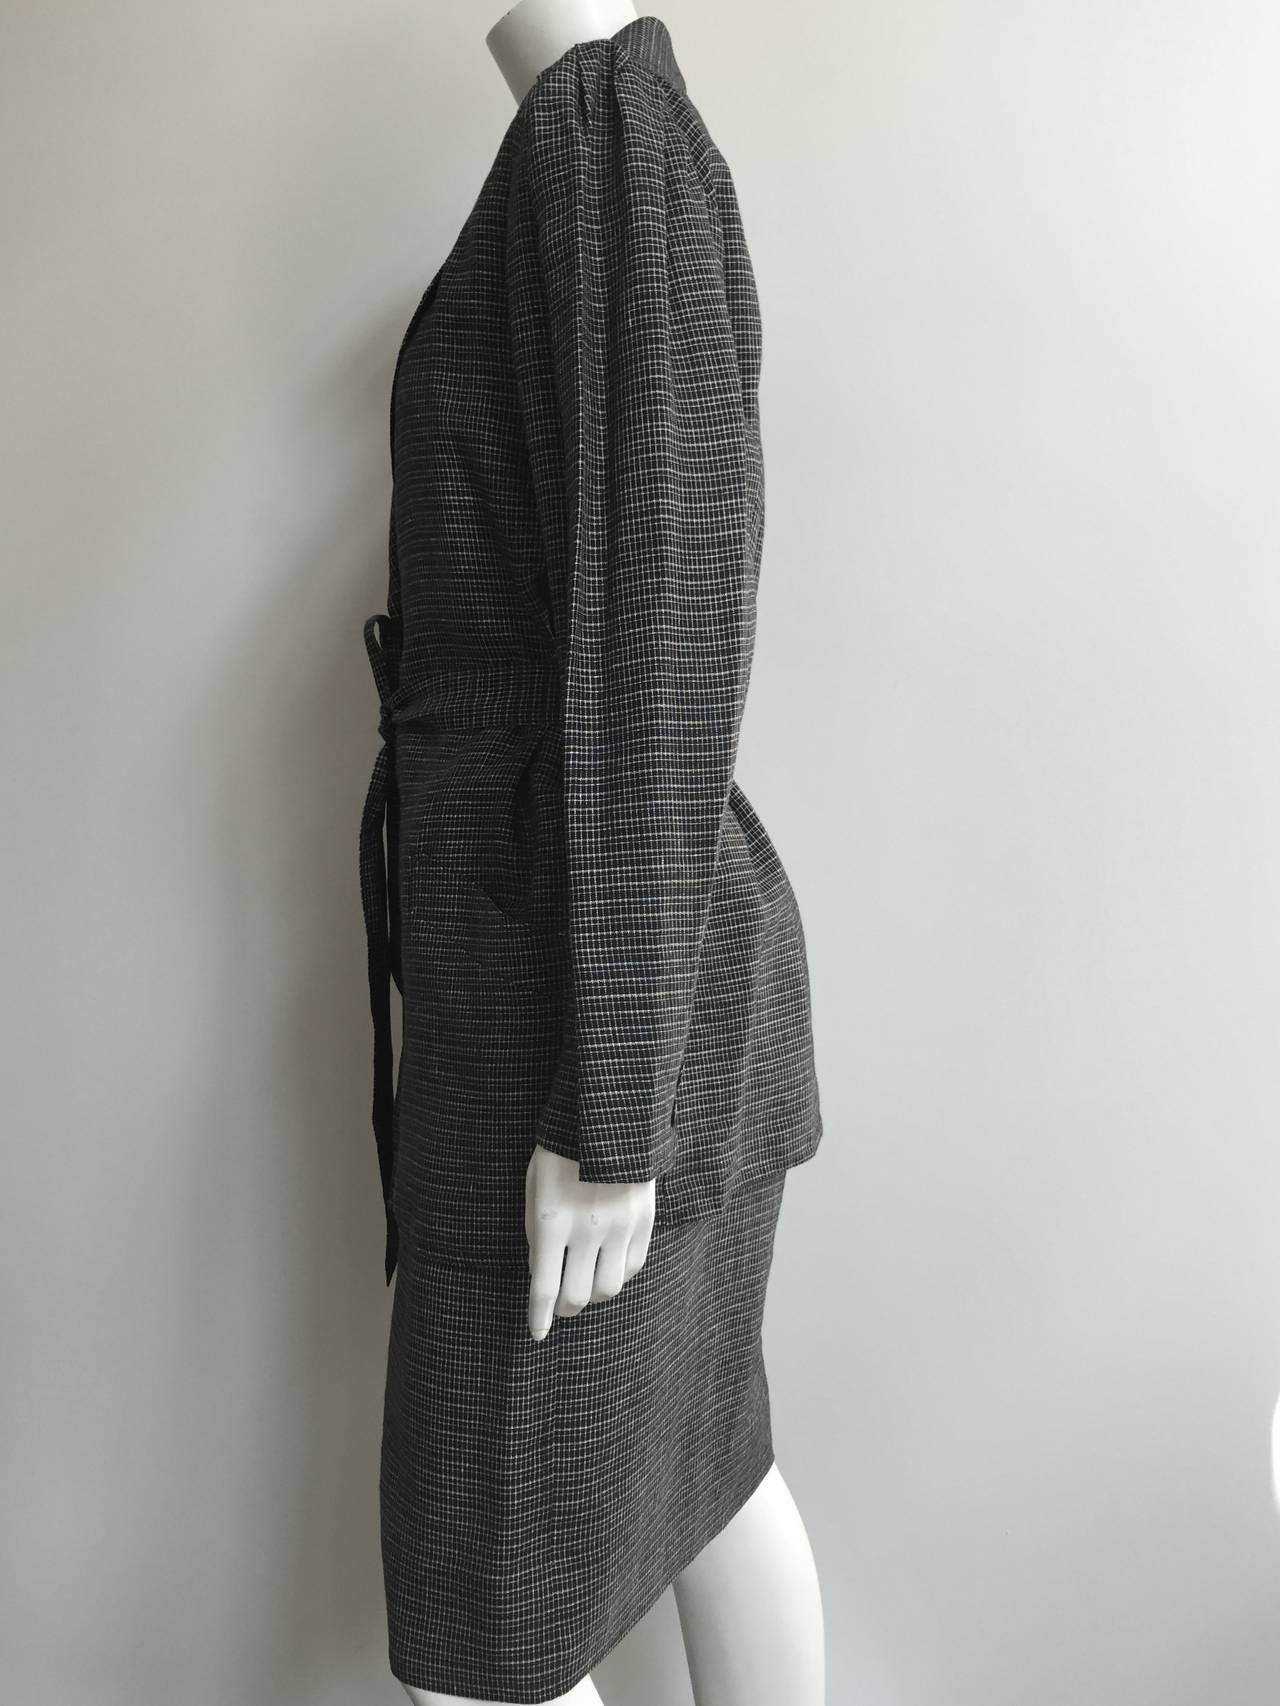 Ungaro Linen Skirt Suit with Pockets and Belt Size 6  In Excellent Condition For Sale In Atlanta, GA